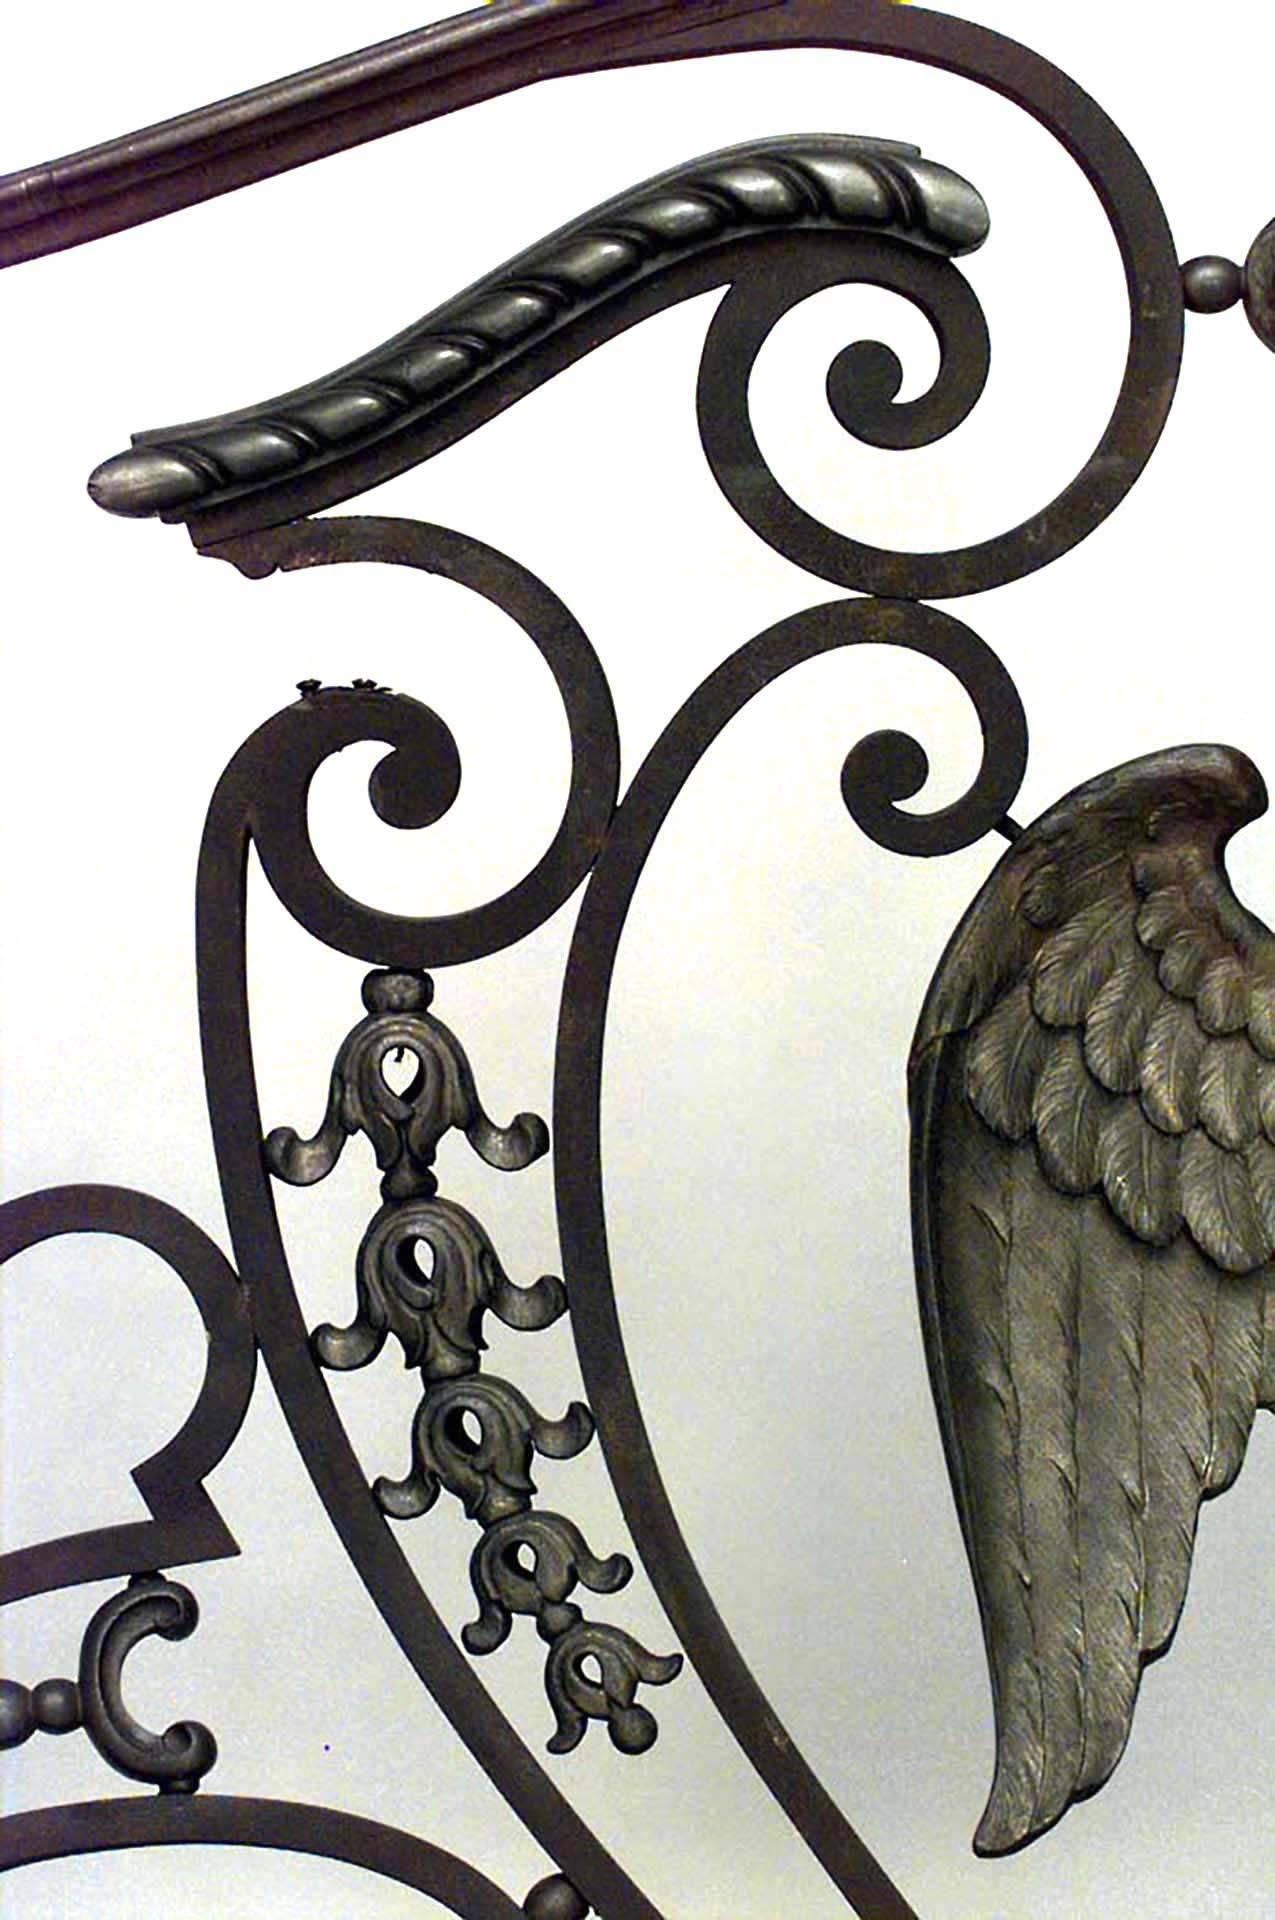 French Empire style (19th Century) iron and bronze trimmed railing with scroll design and eagle center (by repute from Napoleon III library) (Related items: 031616, 042367).
